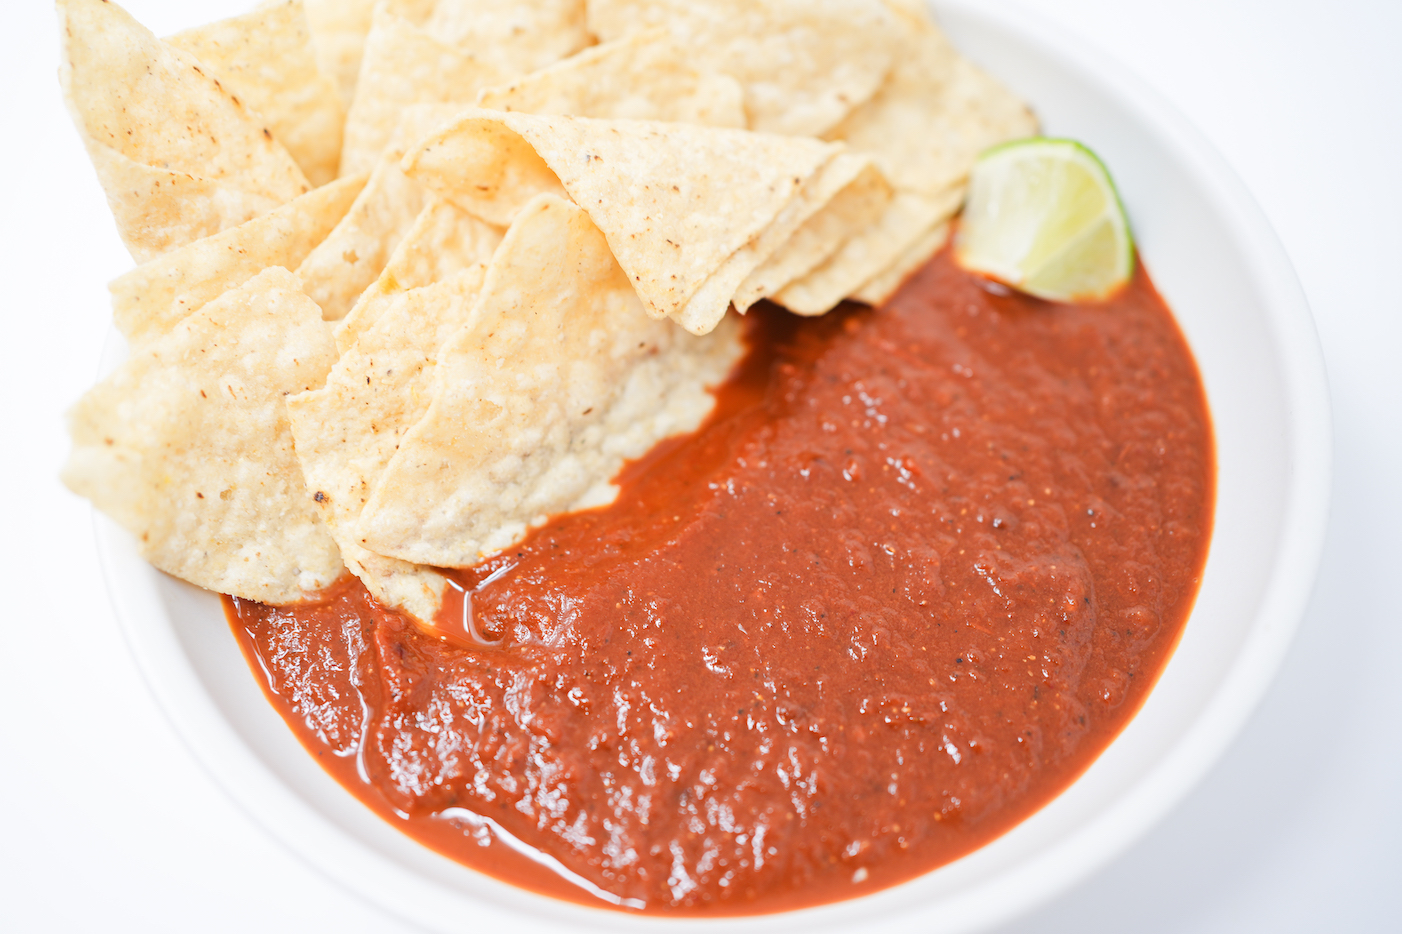 A bowl of vibrant roasted tomato and pasilla pepper salsa, surrounded by crispy tortilla chips and a lime wedge on the side.